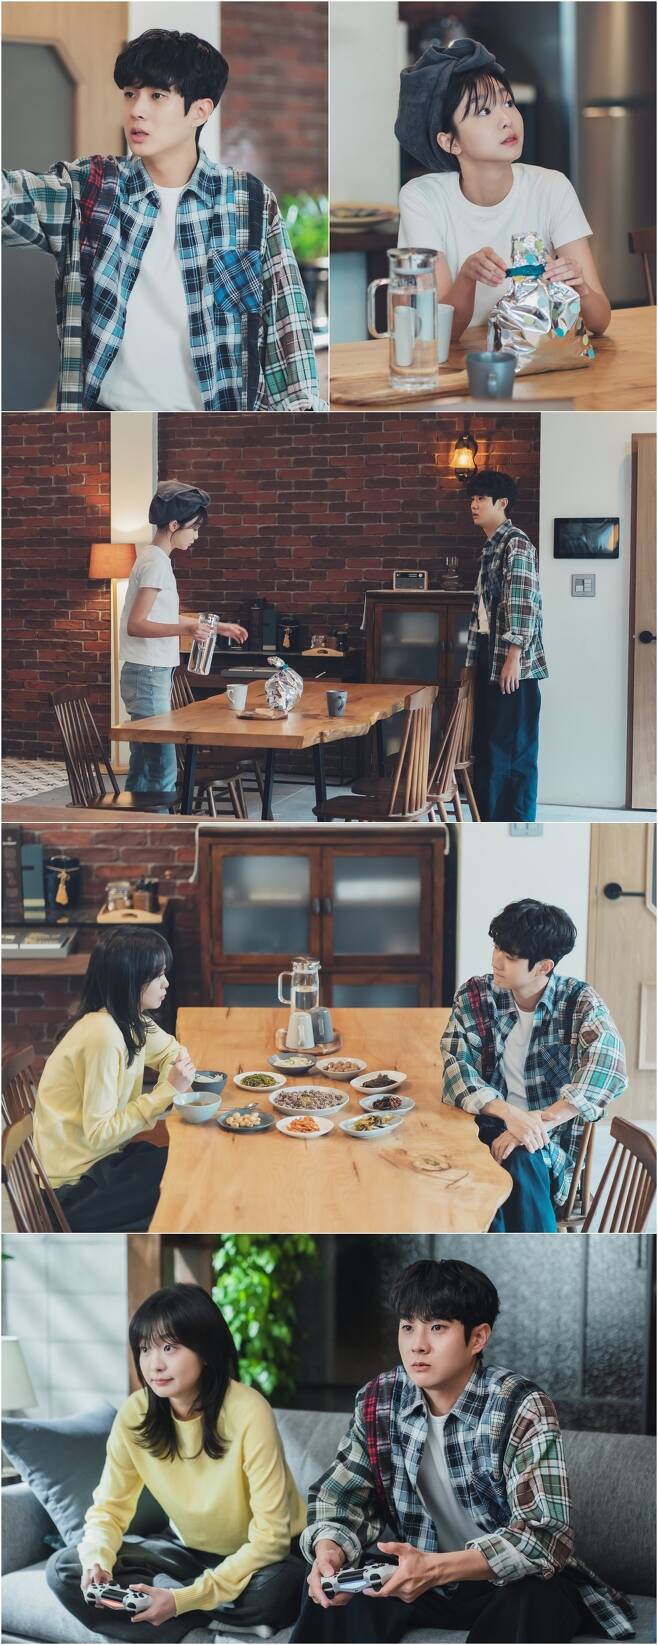 Home dates of Choi Woo-shik and Kim Da-mi were captured.The SBS monthly drama That Year We (playplayed by Inaeun/directed by Kim Yoon-jin and Ethan) unveiled the scene of the guest evangelism of Choi Woong (played by Choi Woo-shik) and Kook Yeon-su (played by Kim Da-mi) who visited his house on January 3.In the last broadcast, Choi Woong and Kook Yeon-su were led by Kim Ji-woong (Kim Sung-chul) to take a semi-forced trip. Two people were confused because their memories and feelings were suddenly sprang up in unfamiliar places.And the weather was as volatile as their hearts, and while the training of the country was tied up in a sudden shower, Choi Woong, who appeared through the rain, kissed him and gave him a sad smile.In the meantime, the Kuk Yeon-soo, who raided Choi Woongs house in the public photos, attracts attention.Choi Woong, a embarrassed landlord, does not care about the nagging, and the cheerful reaction of the Korean training, which prepares meals in a comfortable manner like a house, gives a smile.After kissing on the day trip, the conflicting temperature difference between what kind of change of heart is added to curiosity.Choi Woong, who enjoys the game together with the national training that he has put on the couple of his days together, raises curiosity.In the 9th broadcast on the 3rd, Choi Woong and Kook Yeon-su return from the trip with a complicated mind, and after the kiss, the change of Kook Yeon-su, who feels somewhat uncomfortable with Choi Woong, is drawn.In the previous trailer, Isol (Park Jin-joo) tears in front of Choi Woong, Are you thinking that Choi Woong is a mistake? And the appearance of Kook Yeon-su, who visits Choi Woong in the middle of the night and says, Can I go to bed?